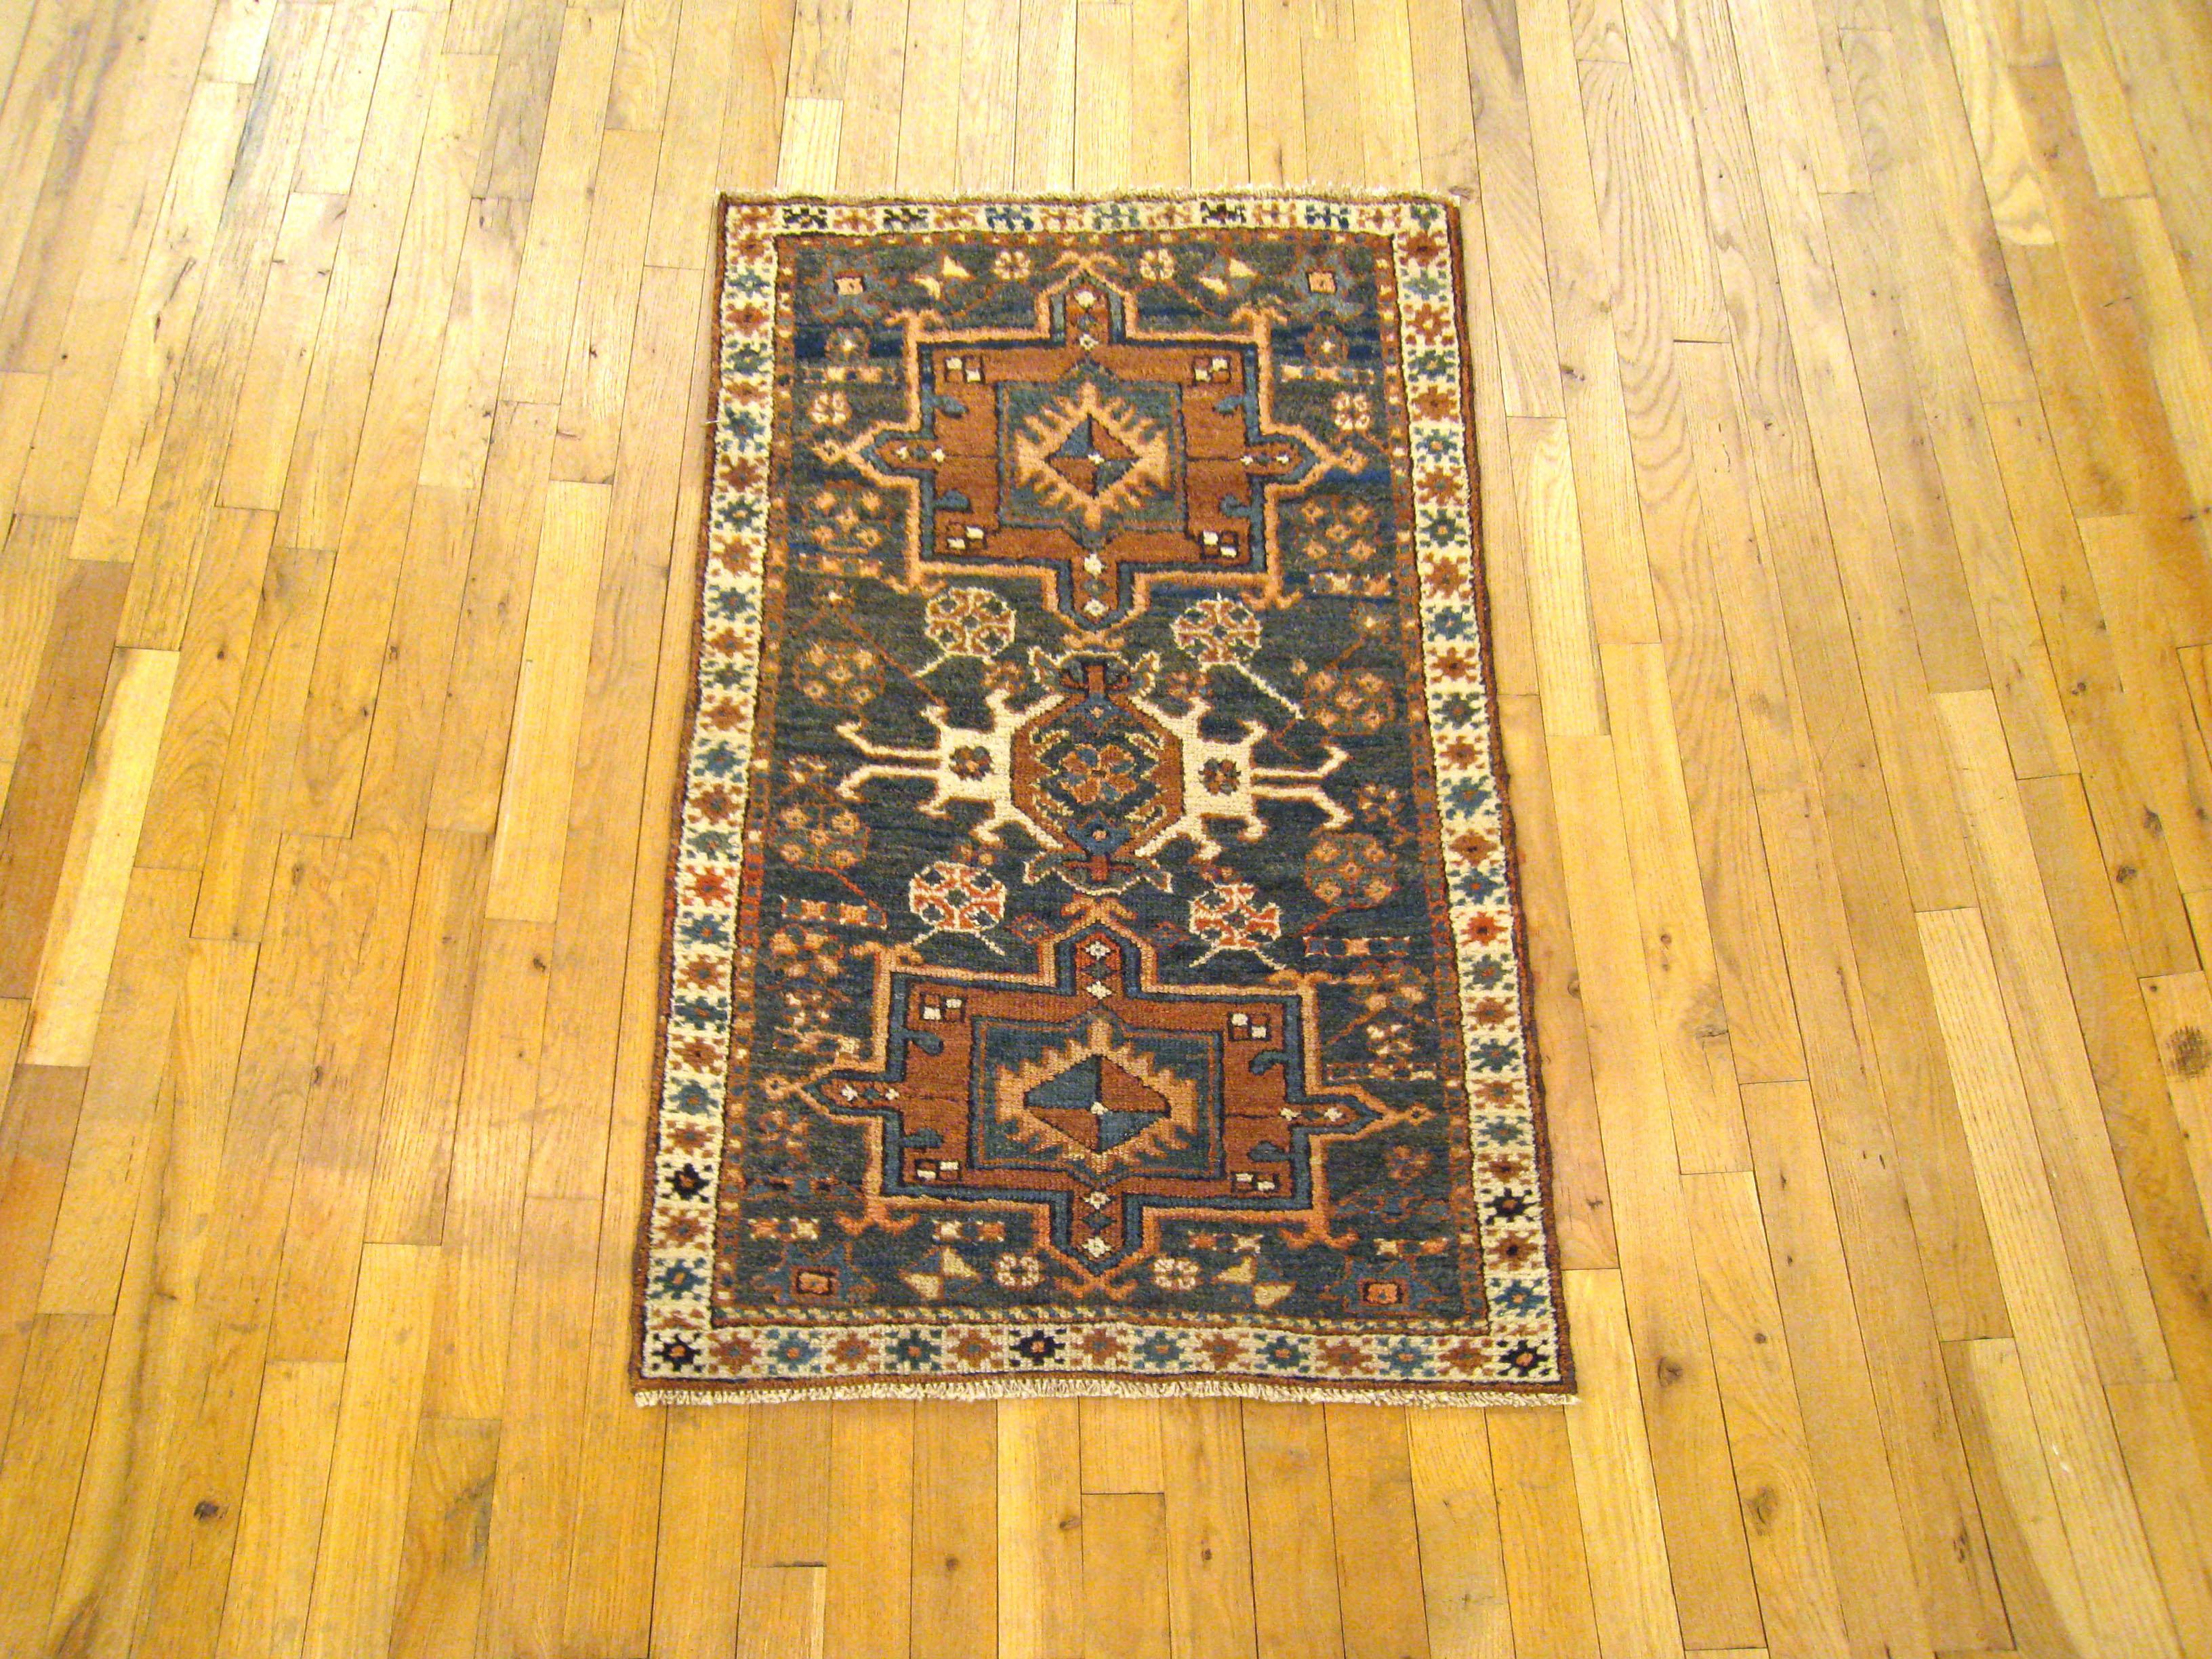 An antique Persian Heriz Karaja oriental rug, size 3'8 H x 2'3 W, circa 1900. This handsome handwoven rug features a symmetrical series of medallions on a blue green field that has a variety of Traditional Design elements and symbols. The field is